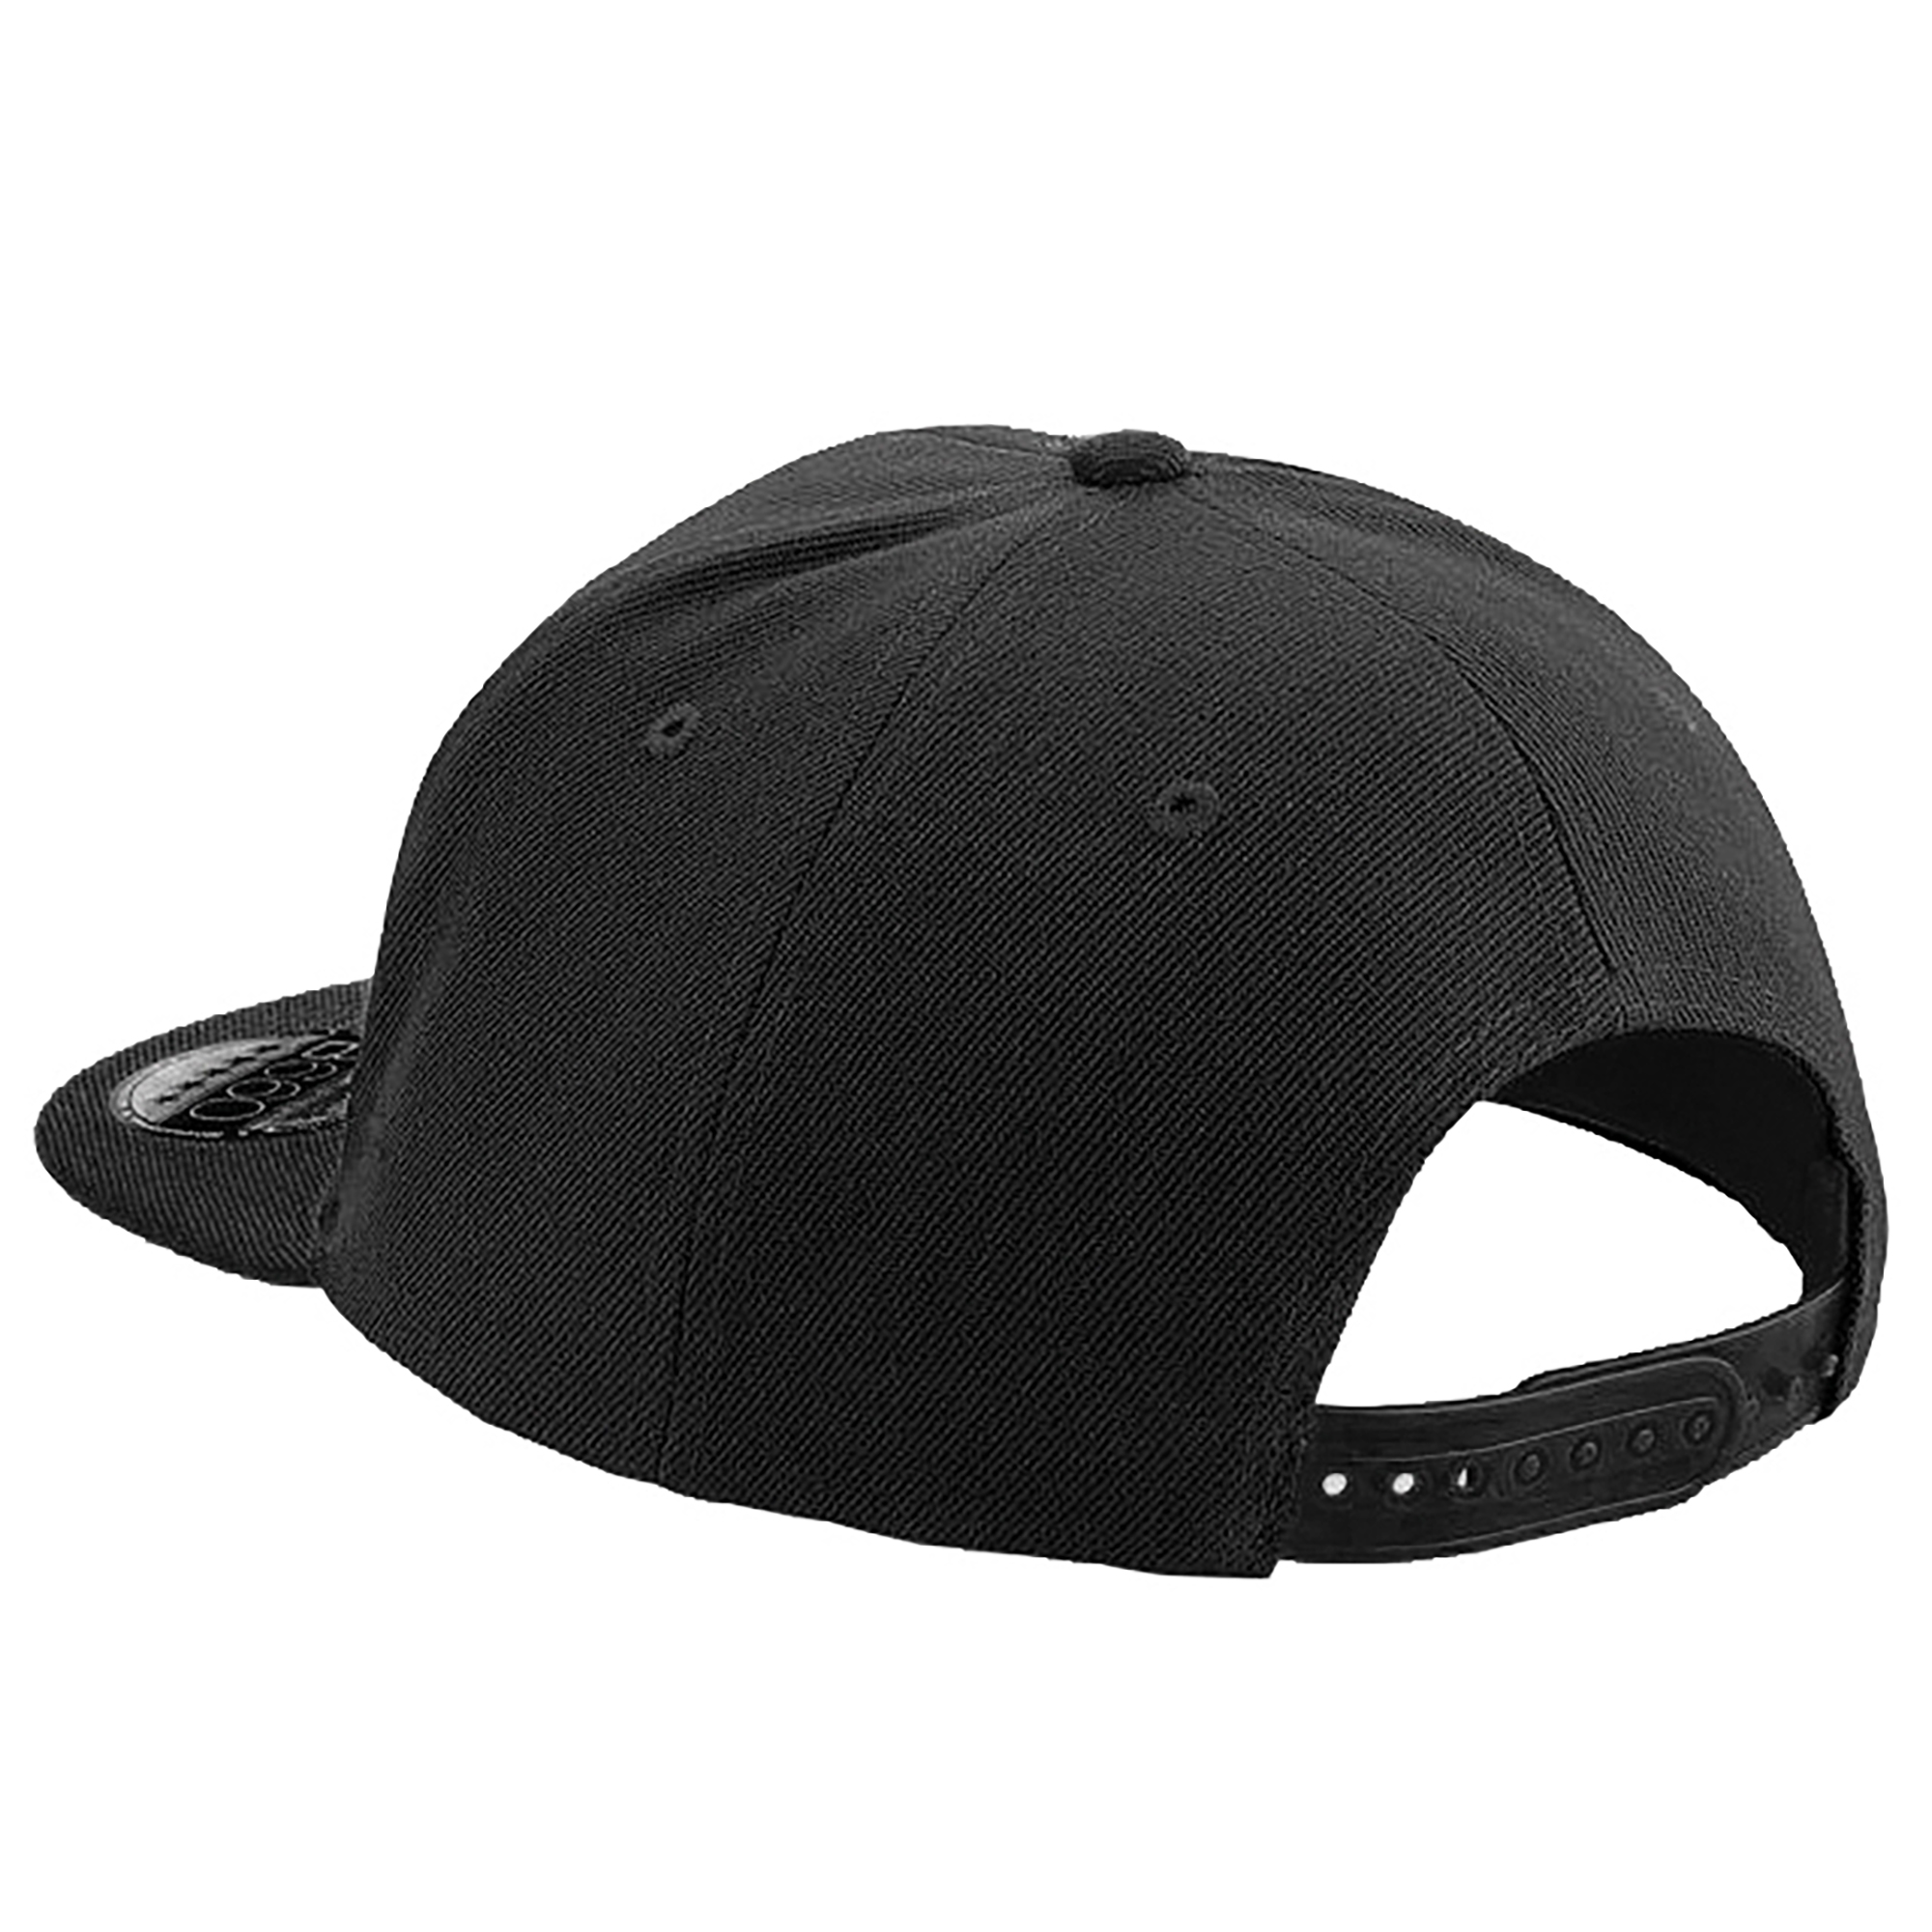 Designed using a classic shape and crafted from 100% polyester, this cap exudes both quality and style. This adult’s retro-style snapback cap has a 5 panel design providing a large branding area. With a snapback size adjuster and a flat peak complimented with an authentic peak sticker. A great on-trend option.